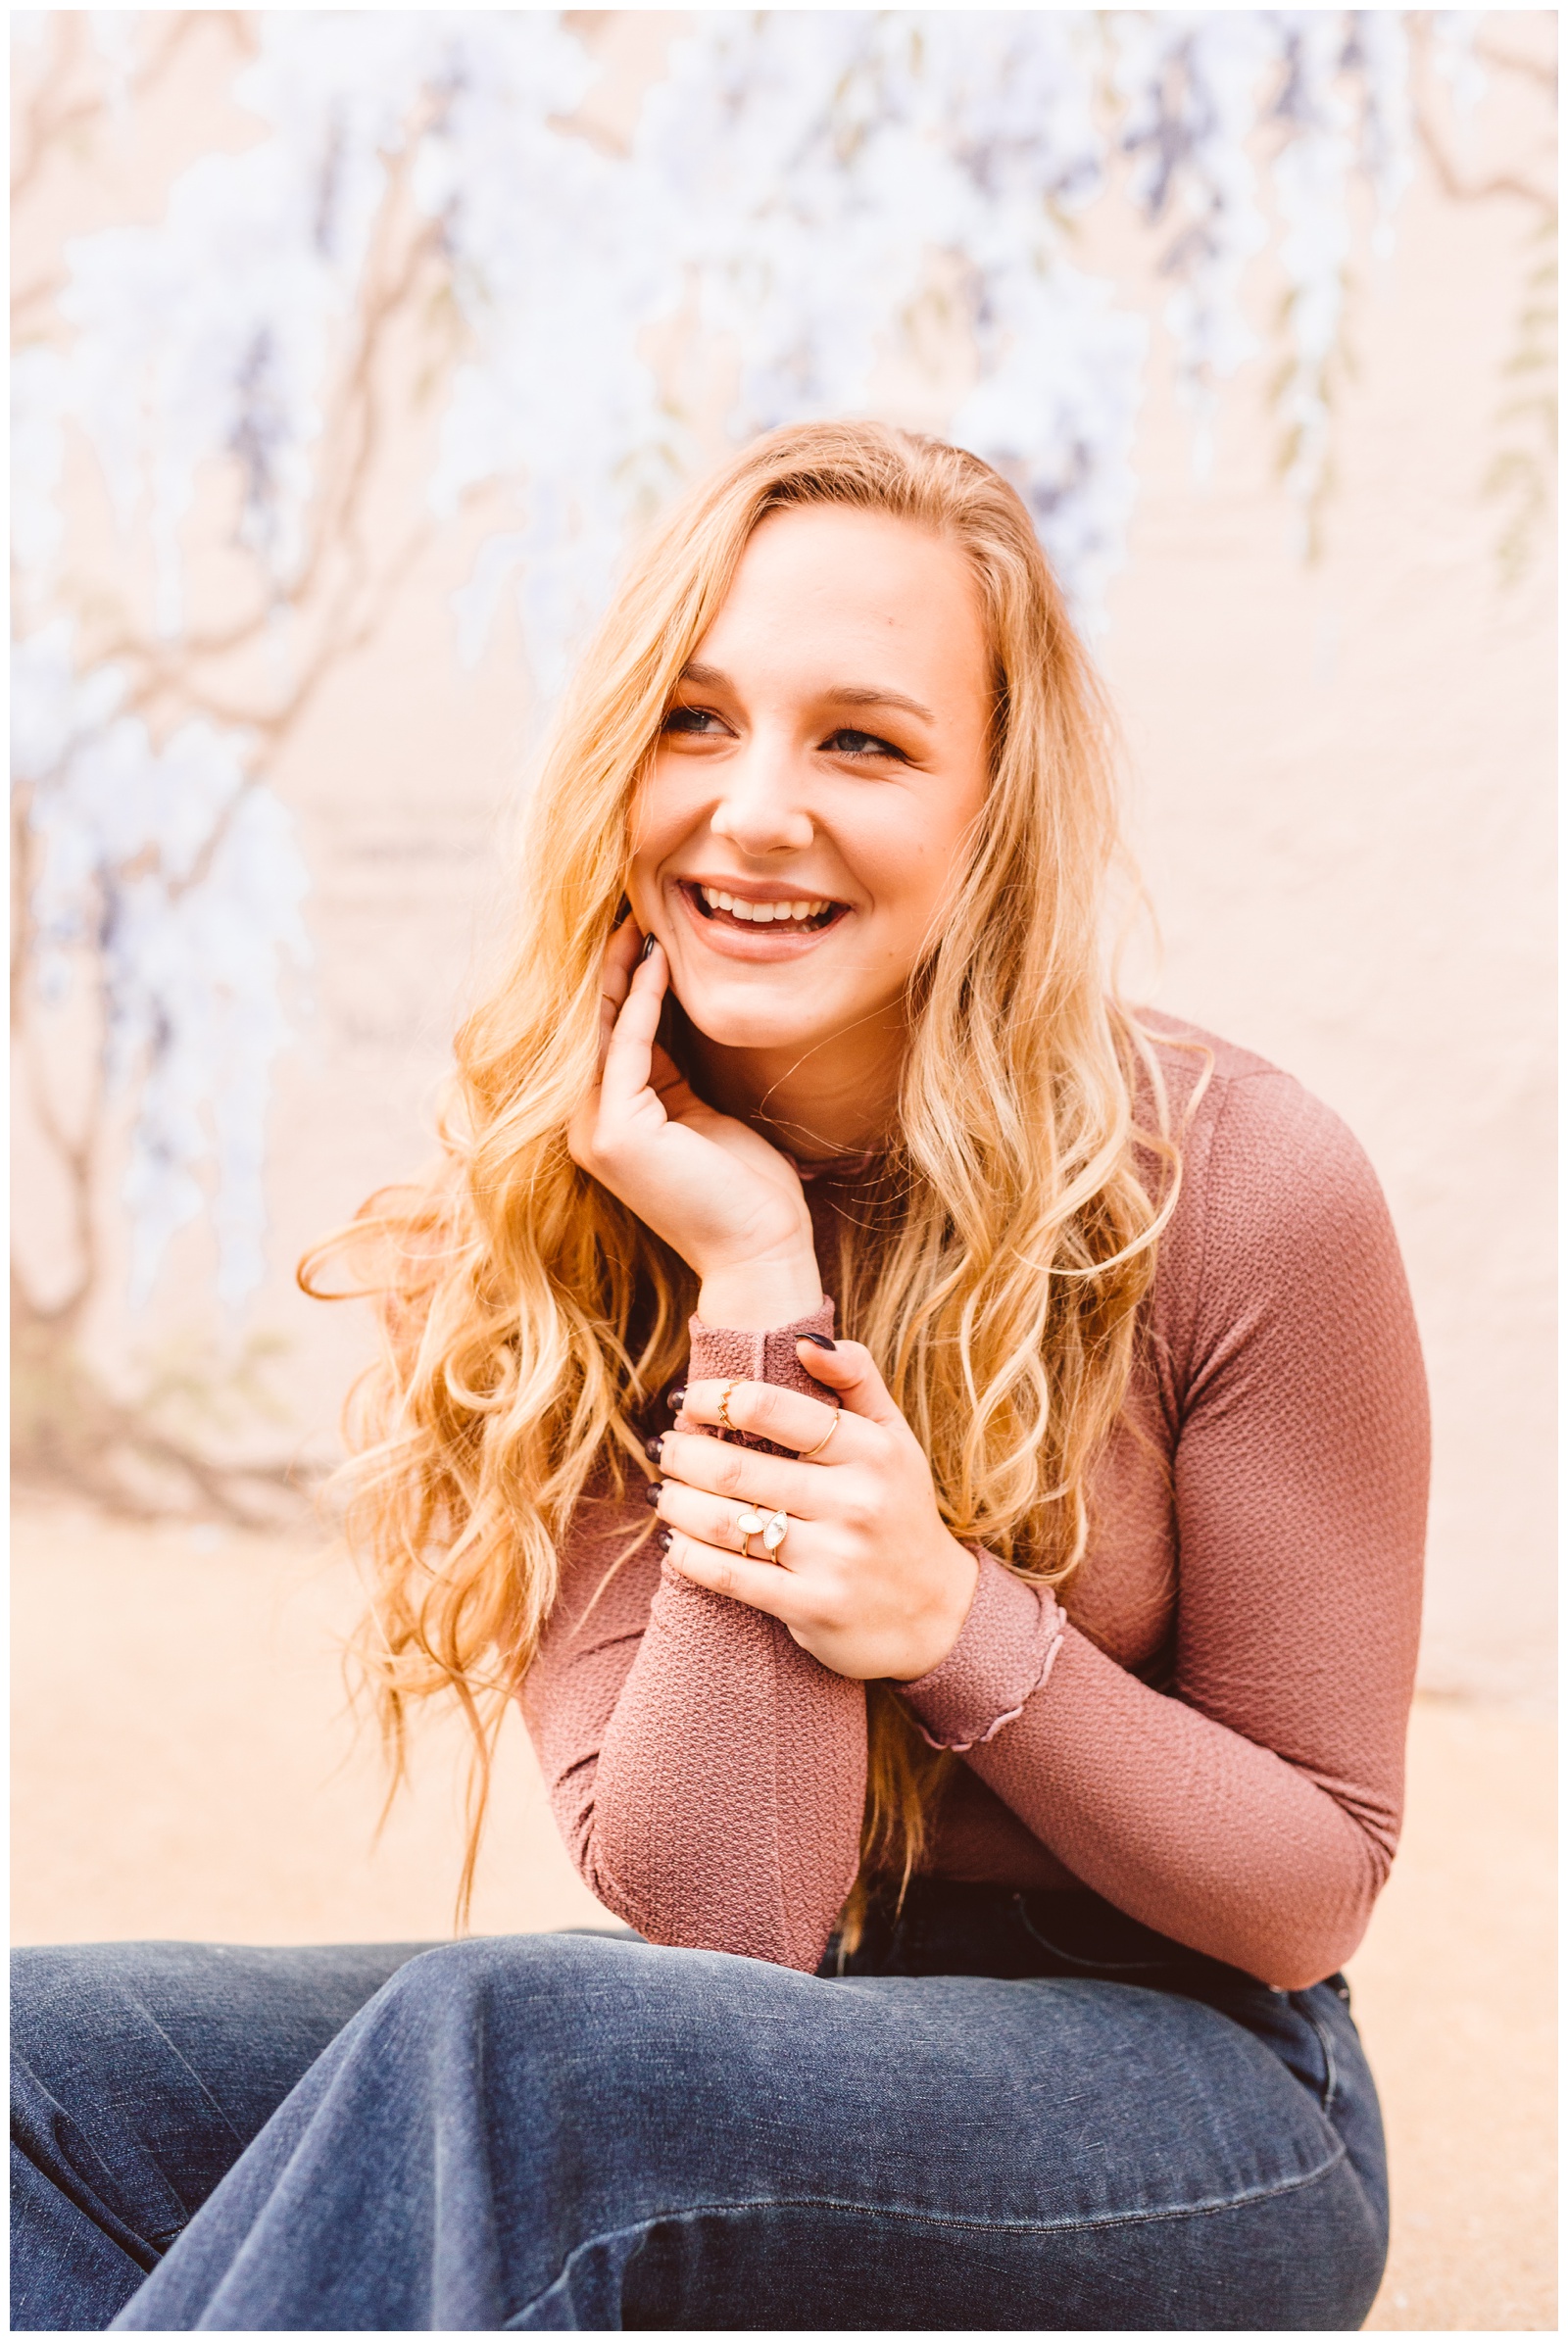 Warm and Vibrant Fall Senior Session Inspiration -Annapolis Maryland - Brooke Michelle Photography